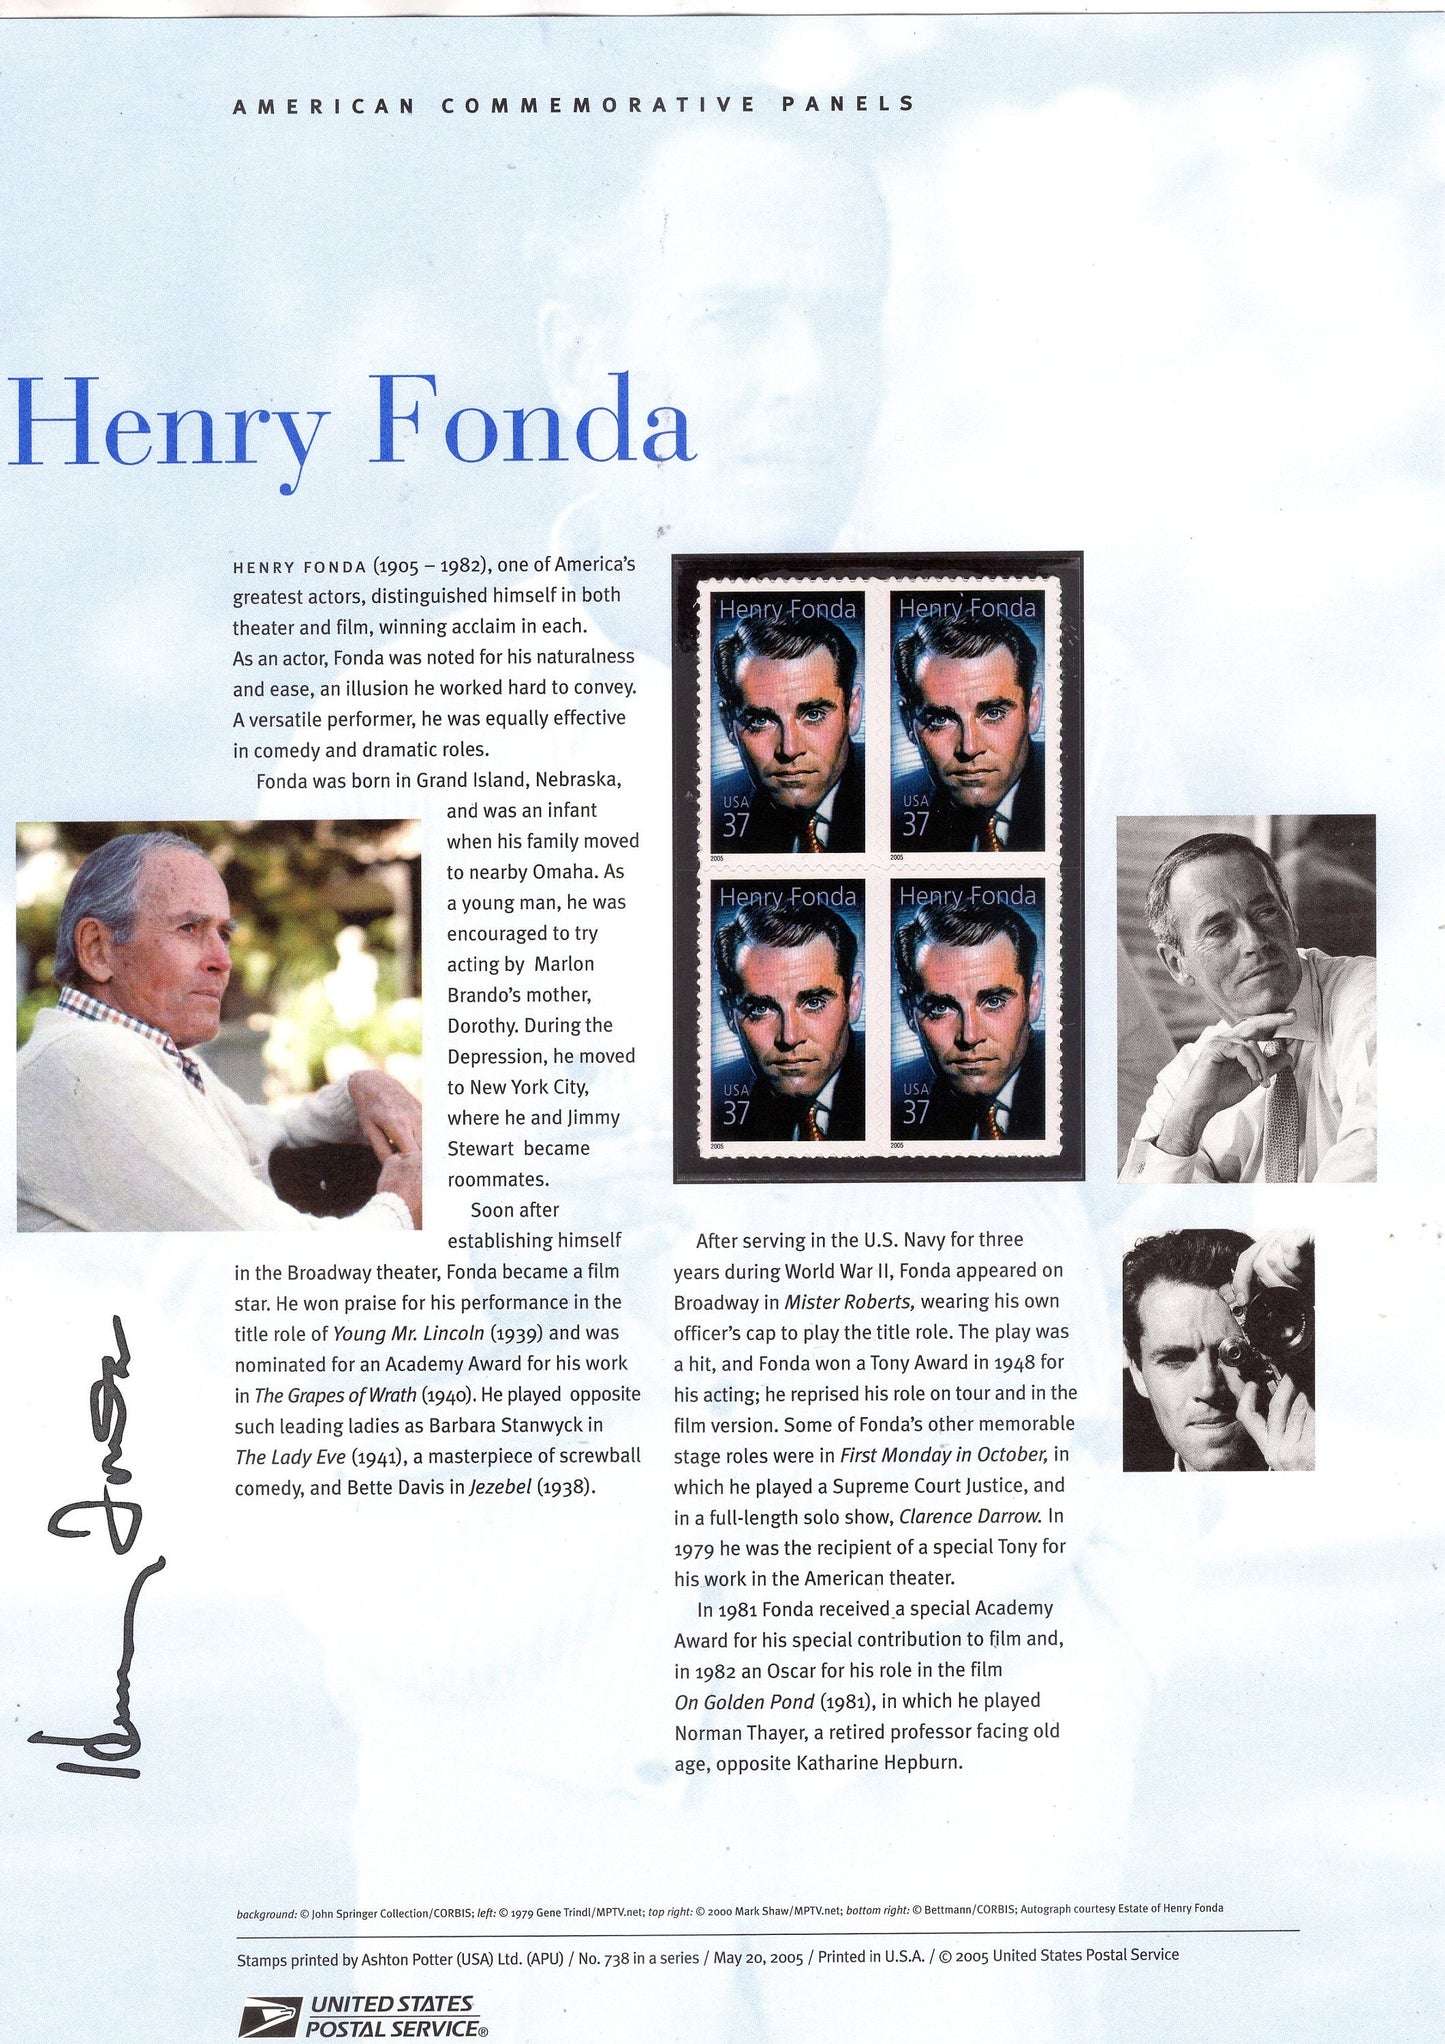 HENRY FONDA HOLLYWOOD Legend Special Commemorative Panel plus Actual Stamps + Illustrations and Text Great Gift 8.5x11 '05 -